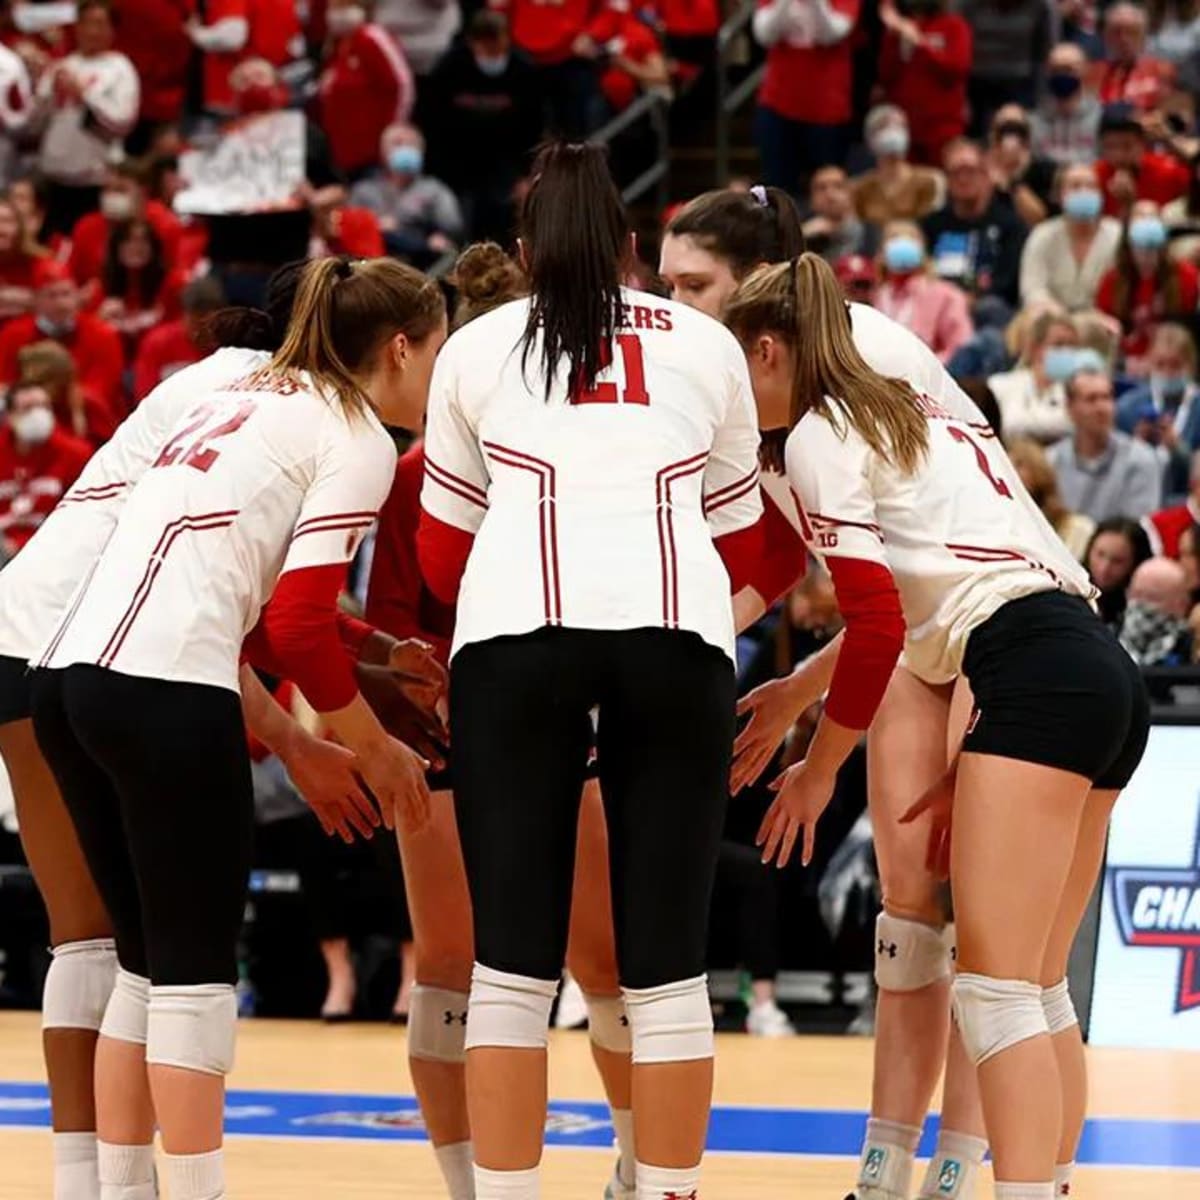 Watch Wisconsin Badgers at Arkansas Razorbacks in Volleyball - How to Watch and Stream Major League and College Sports